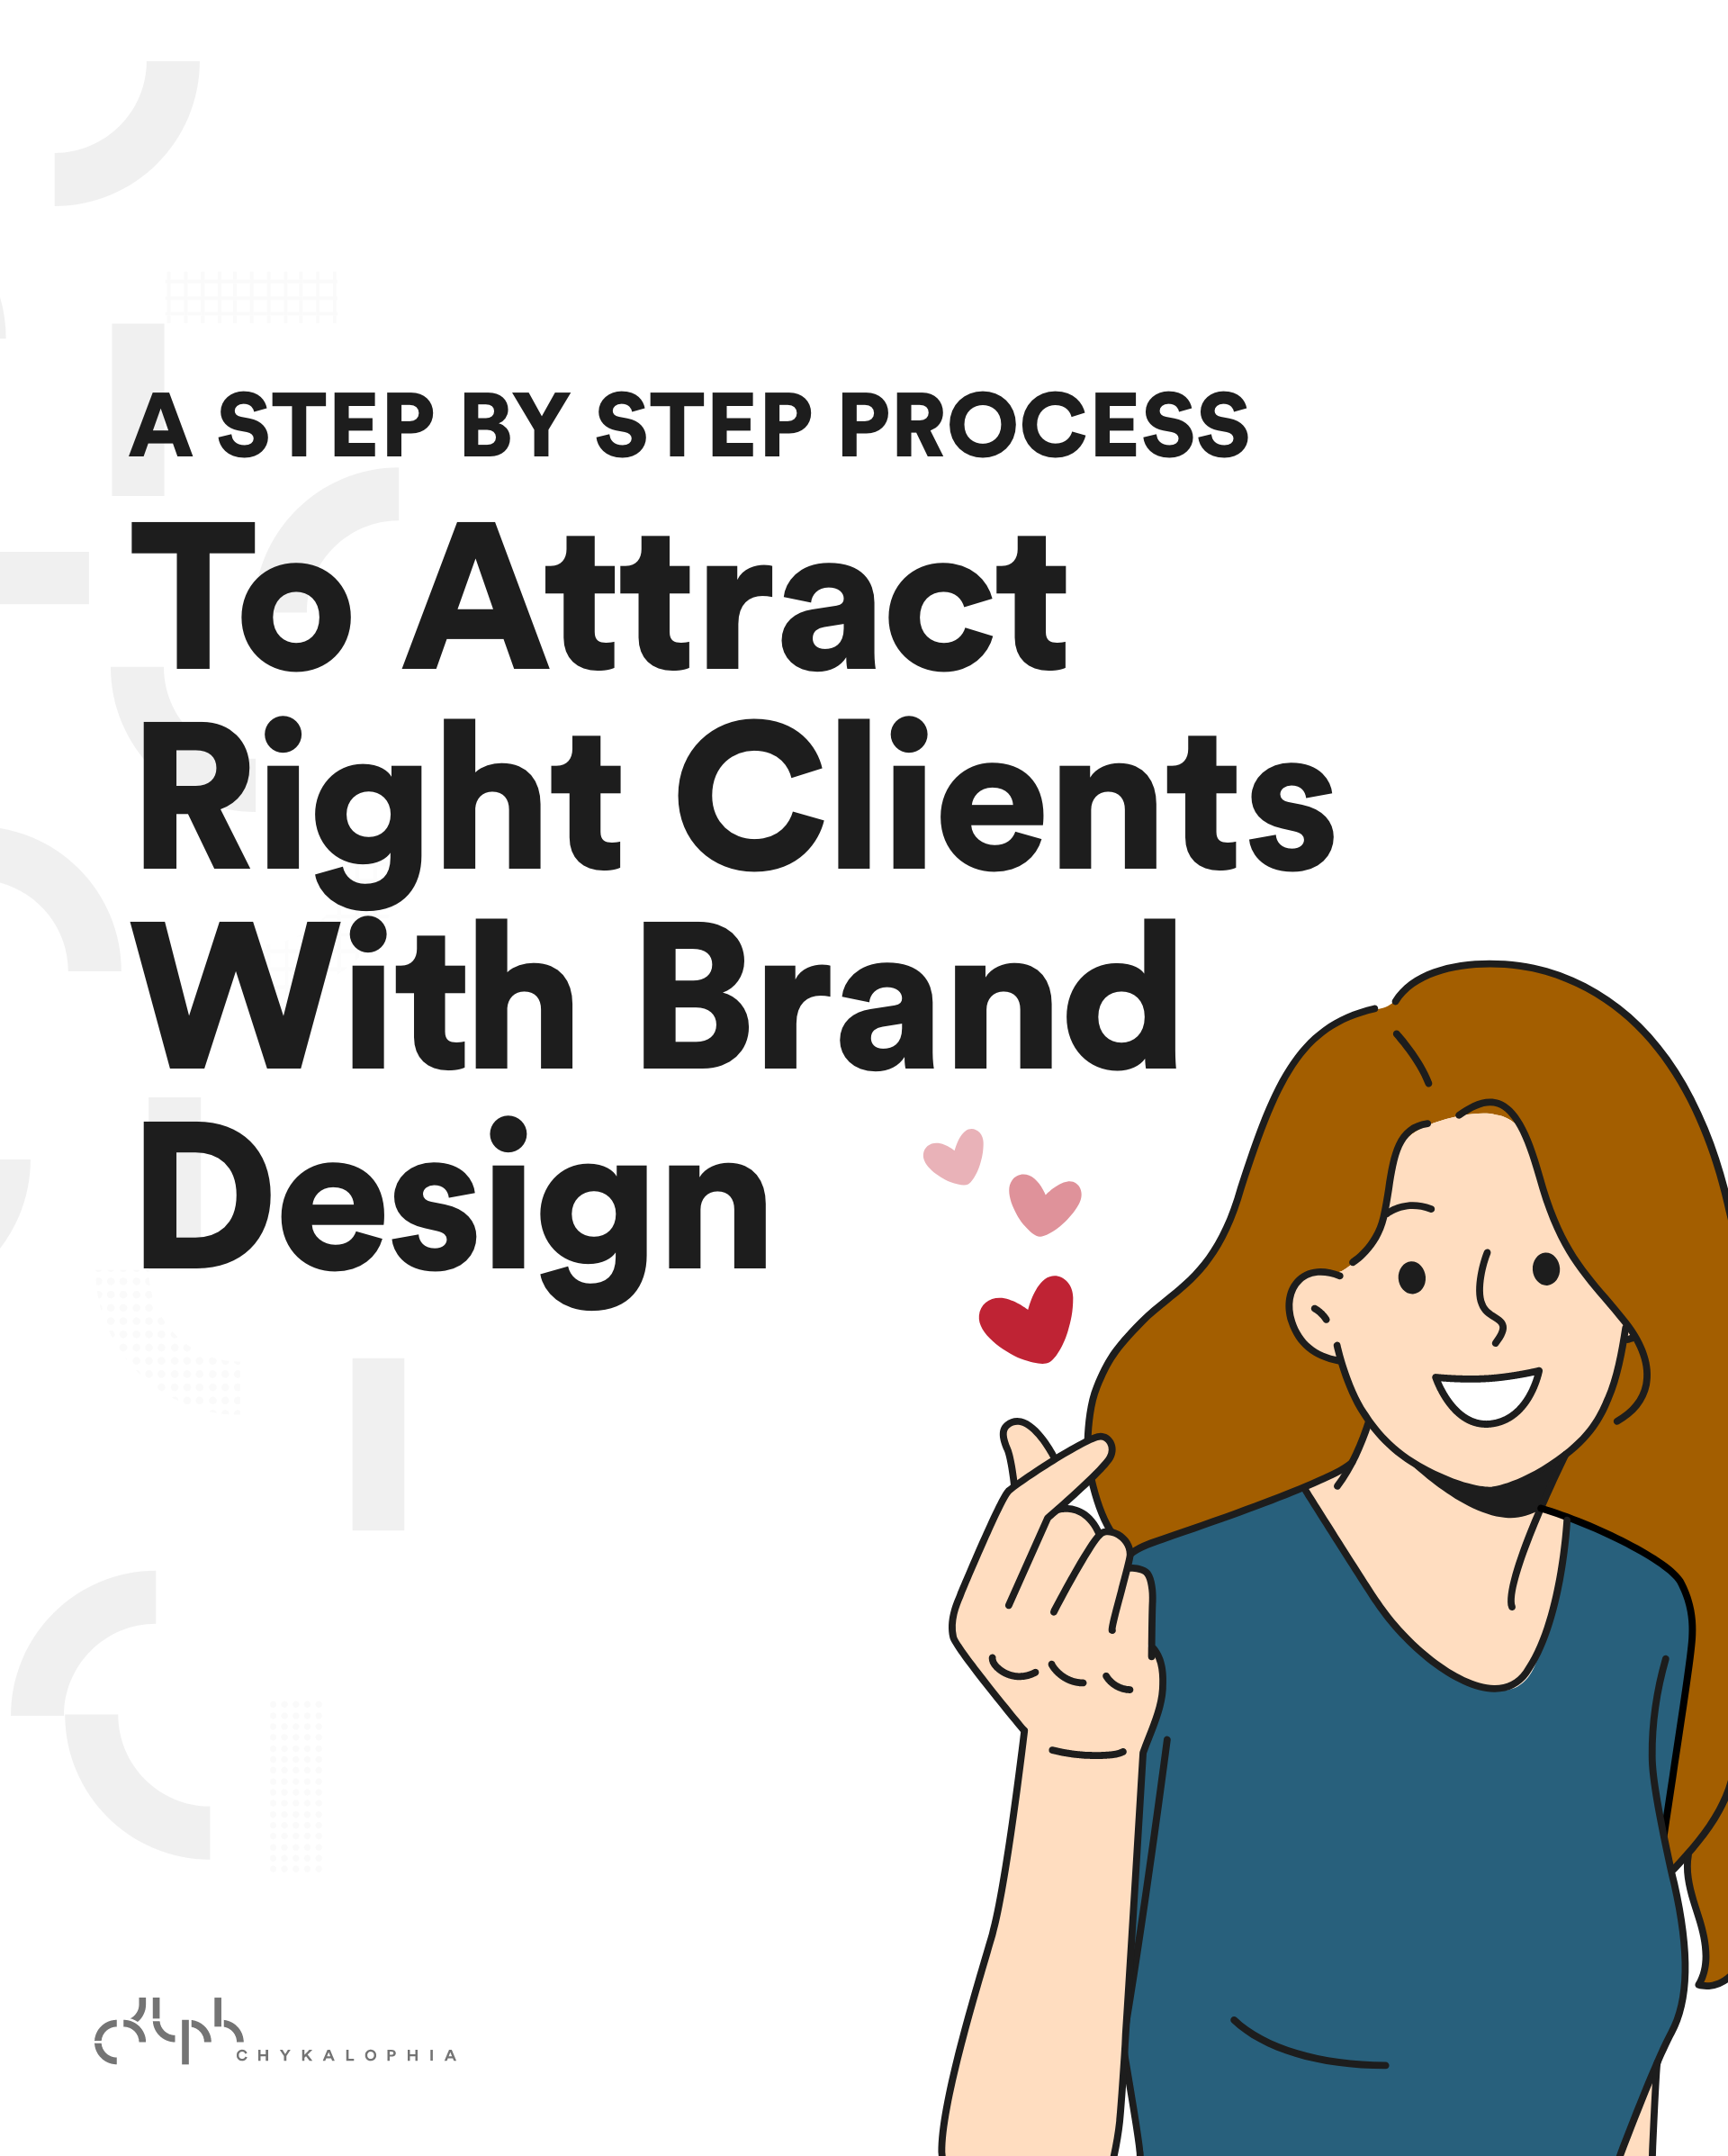 A Step by Step Process to Attract Right Clients With Brand Design